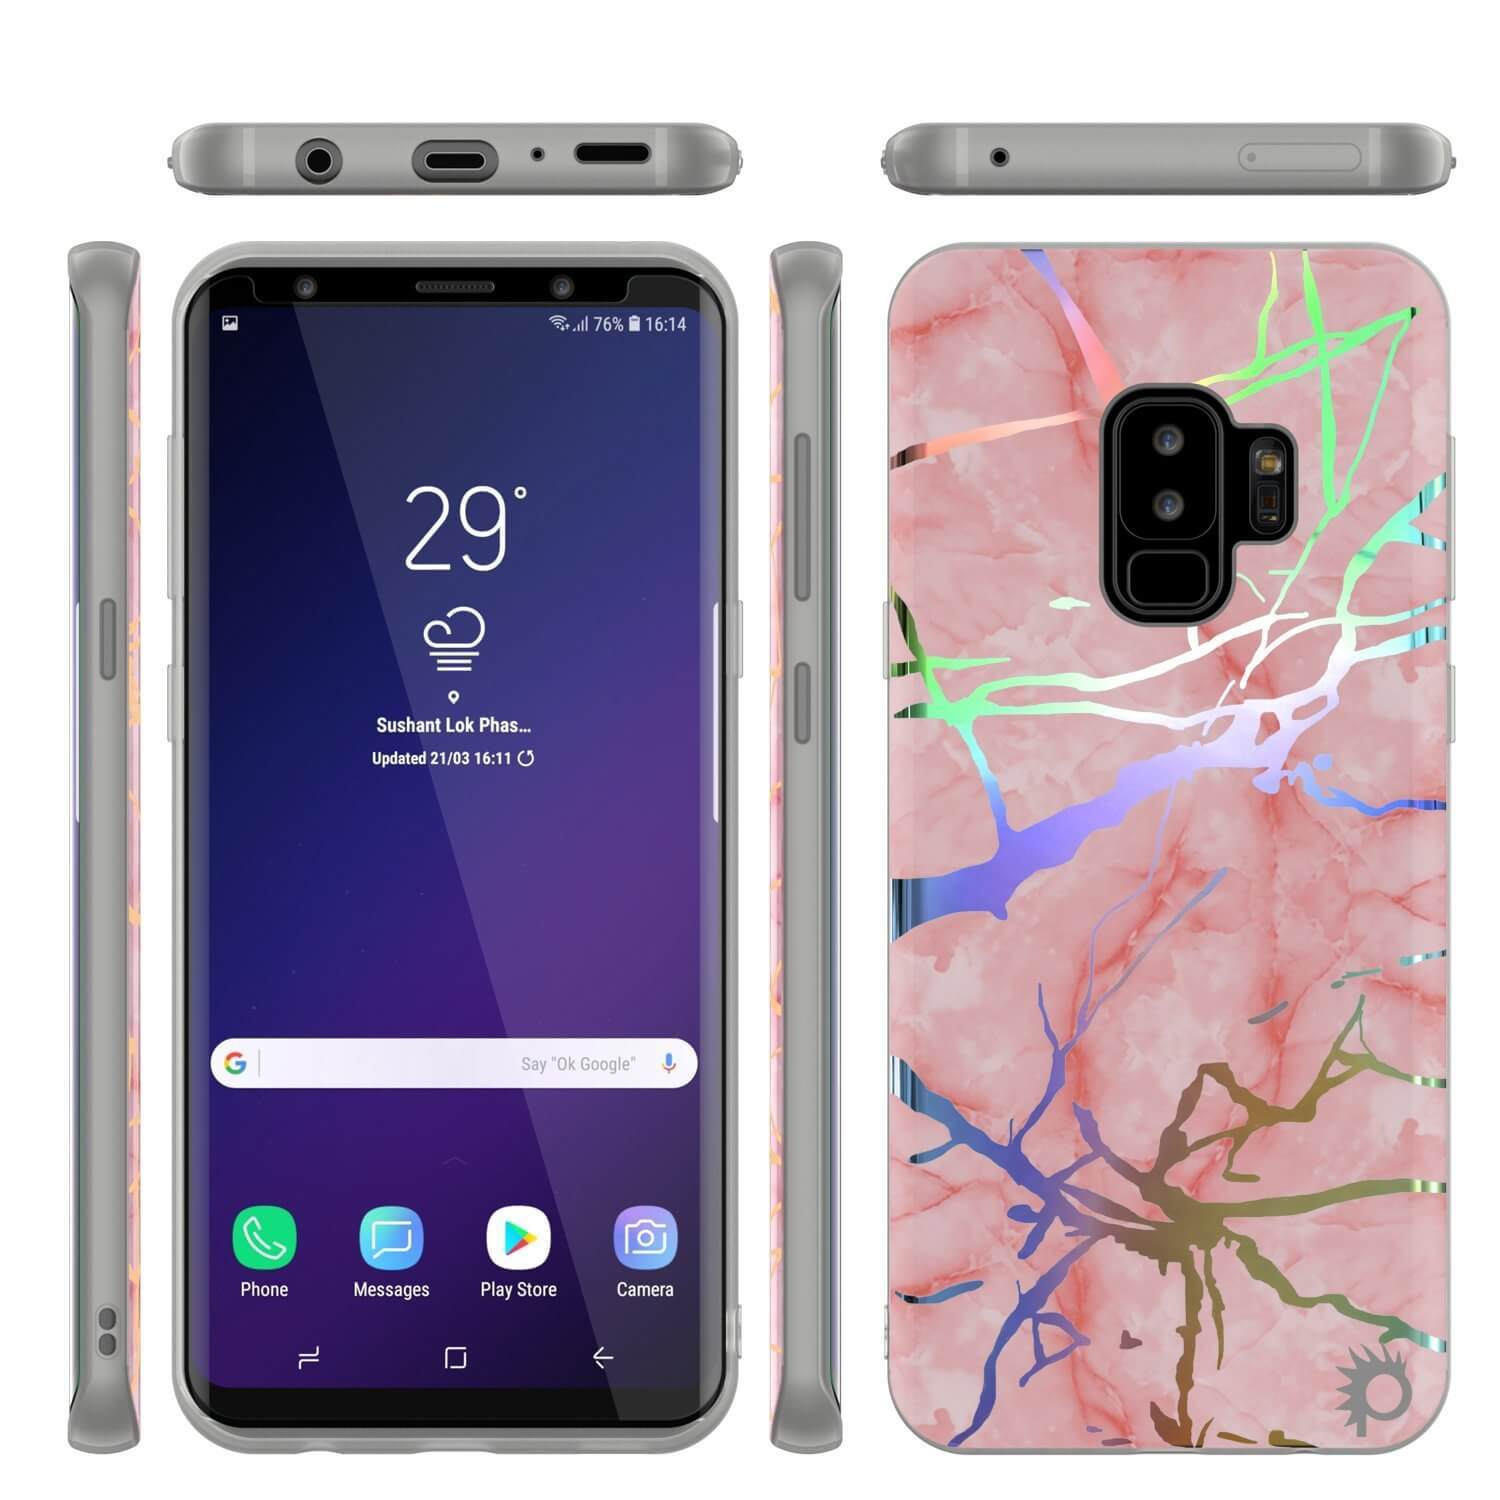 Punkcase Galaxy S9+ Protective Full Body Marble Case | Rose Mirage